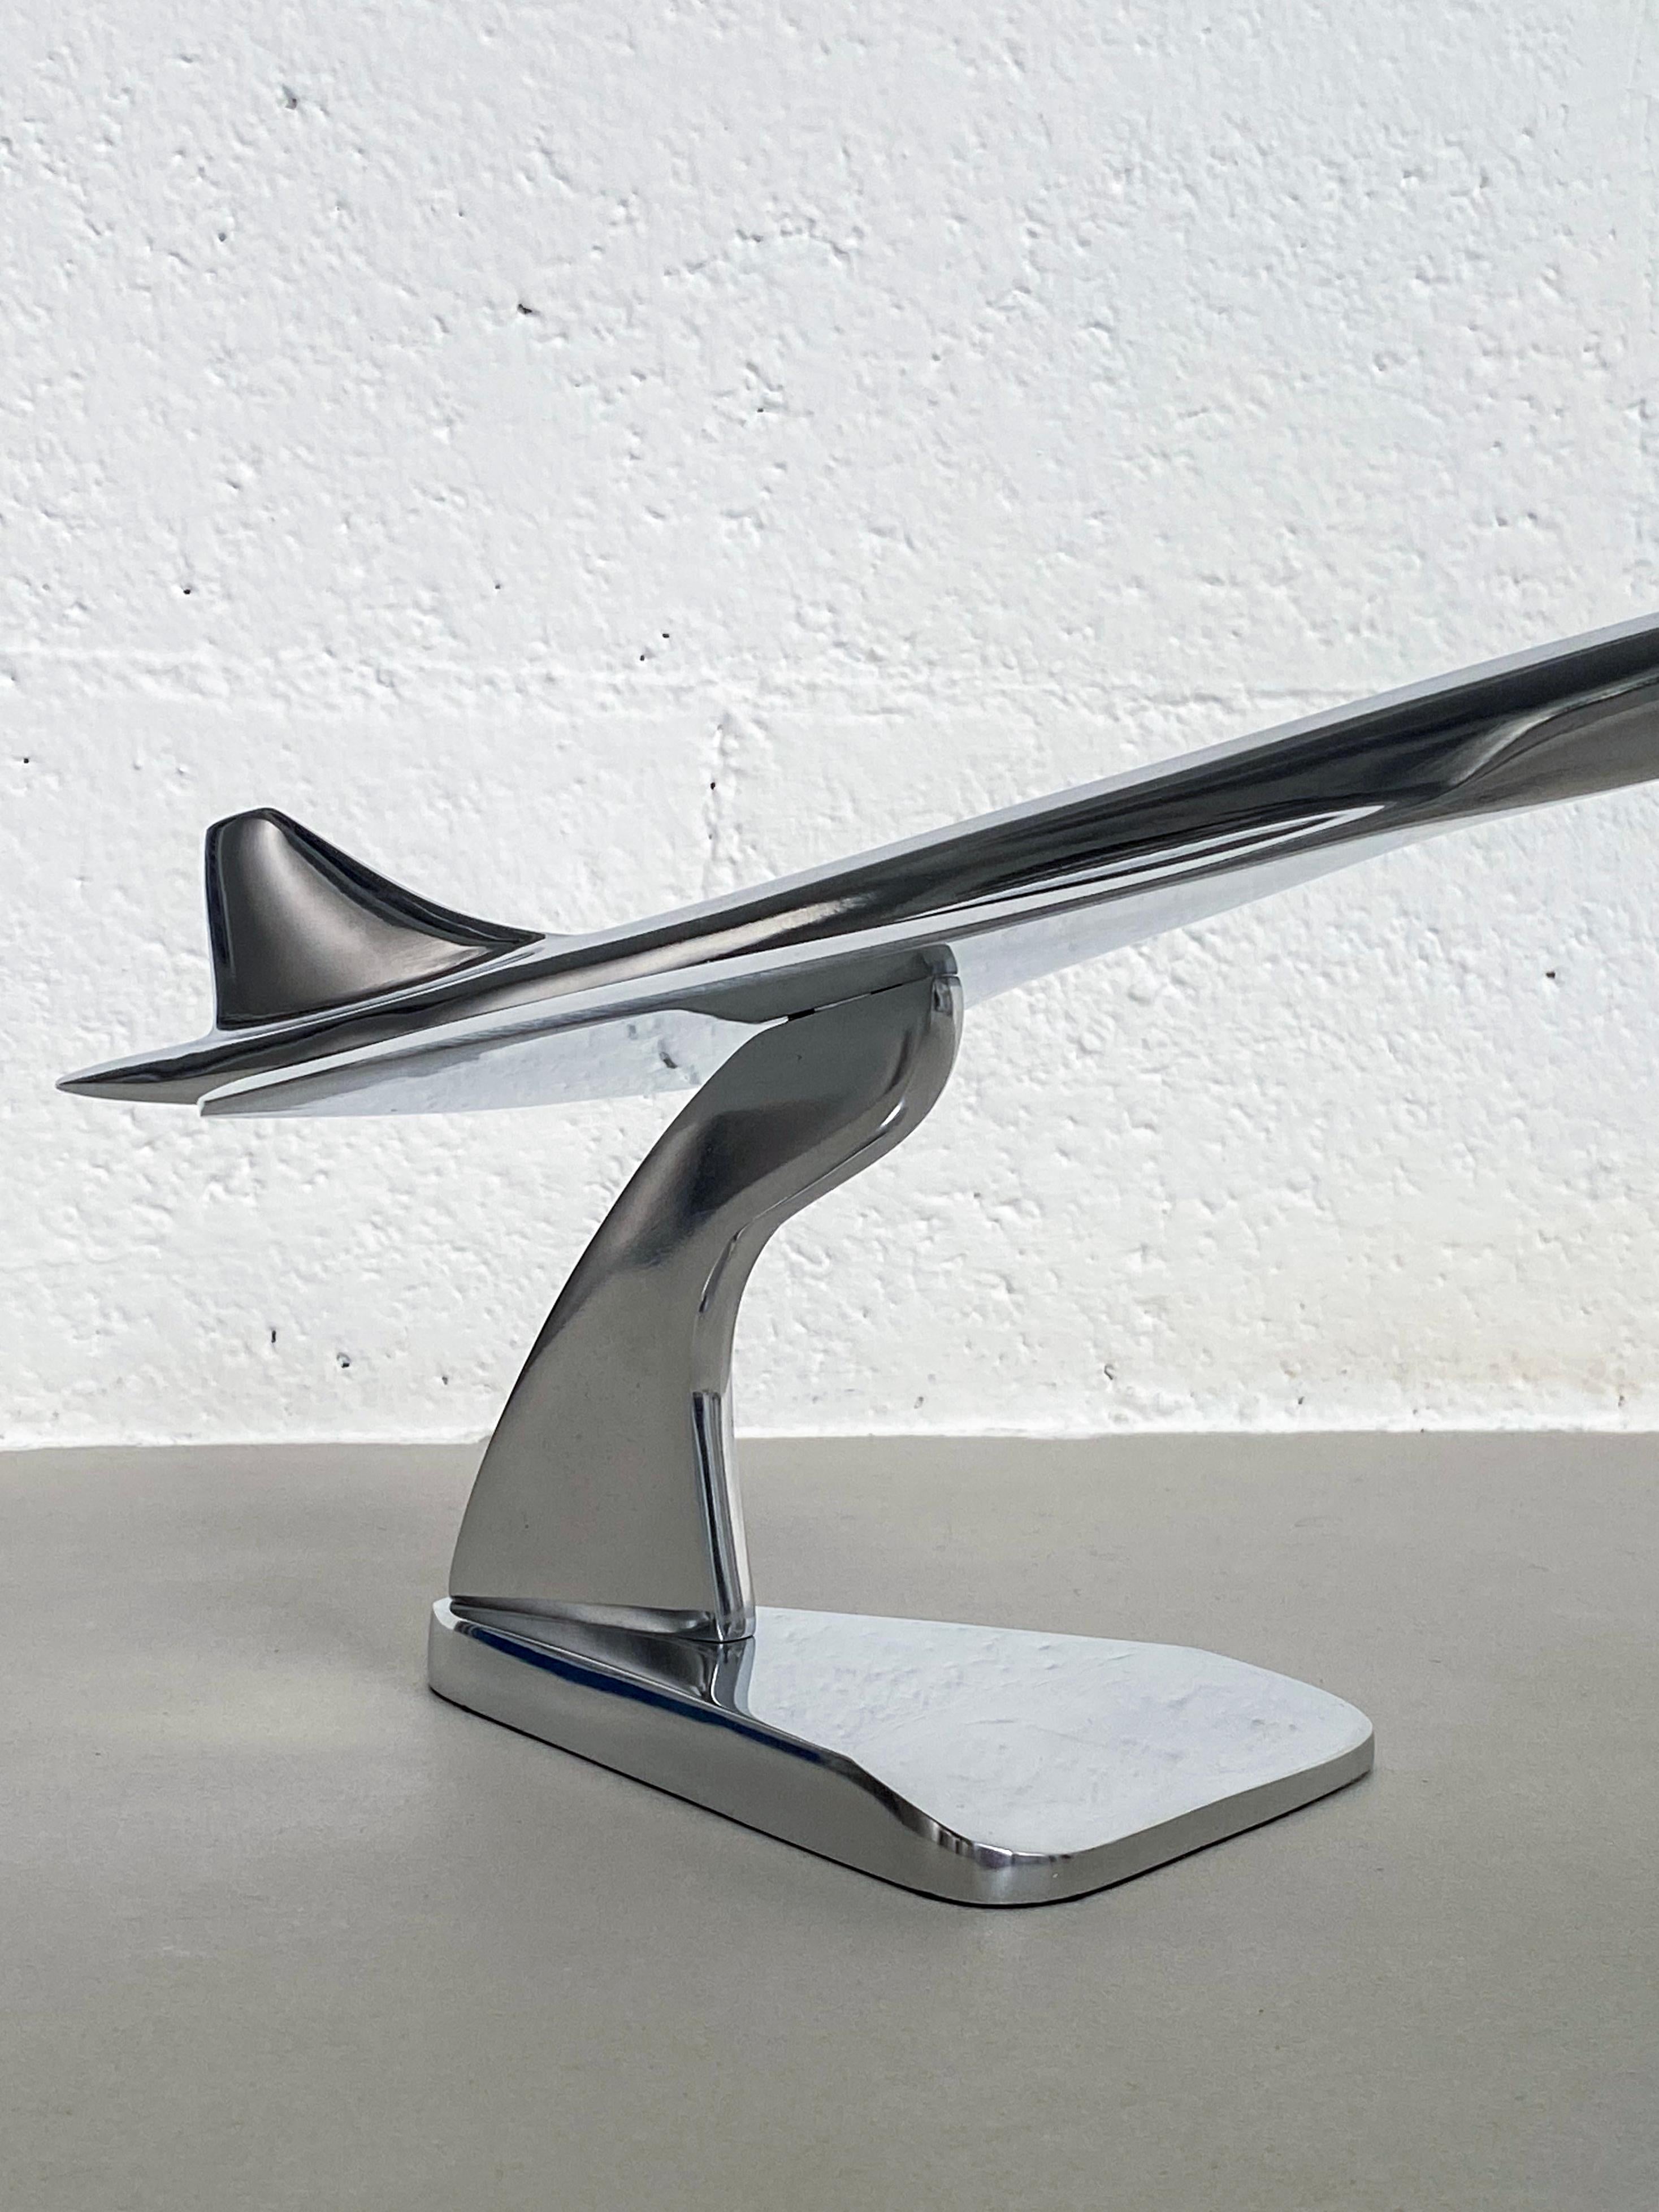 Concorde Supersonic Plane Display Mounted Sculpture in Polished Stainless Steel In Excellent Condition For Sale In Milan, IT